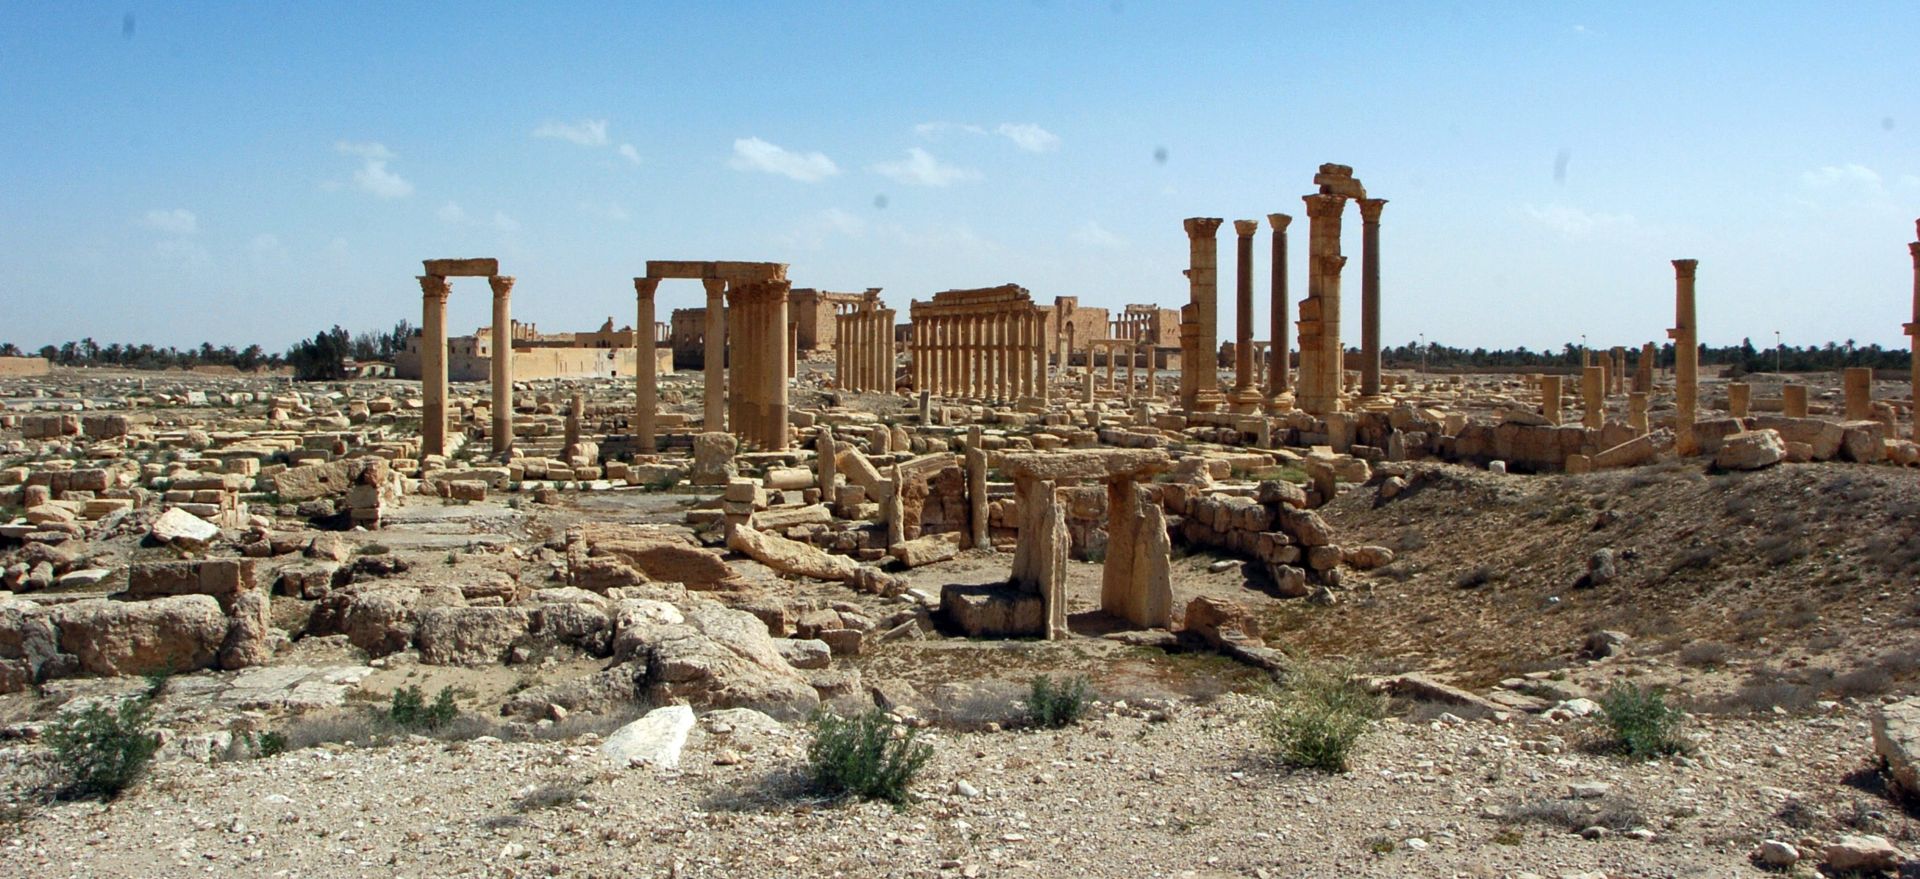 epa05232944 The archeological site at the ancient city of Palmyra, which the Syrian troops had recaptured from Islamic State militants, in central Syria, 27 March 2016. The General Command of the Syrian Army and Armed Forces confirmed in a statement on that they Palmyra city and the mountains and hills overlooking around it are back under their control. Palmyra, which is located in Homs province, was captured by the Islamic State jihadist group on 20 May 2015 and was partly destroyed.  EPA/STR